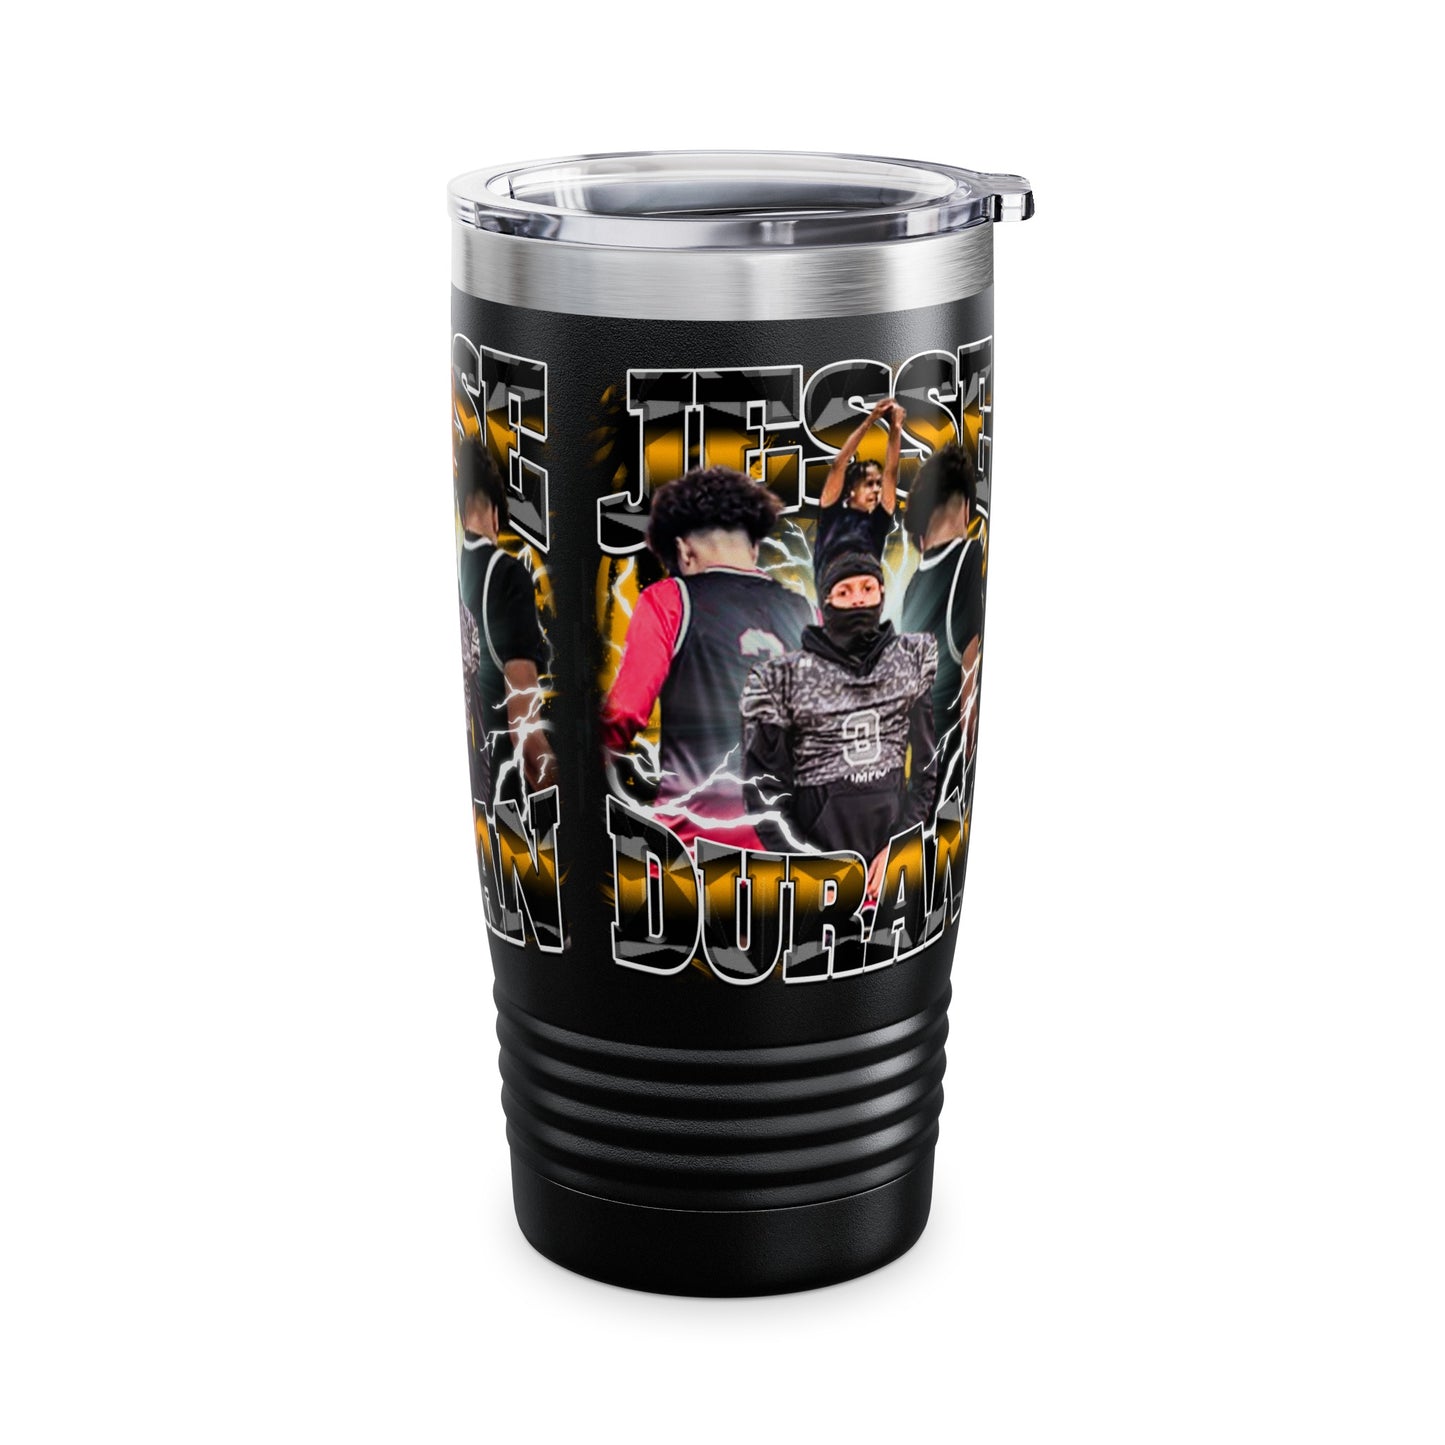 Jesse Duran Stainless Steal Tumbler